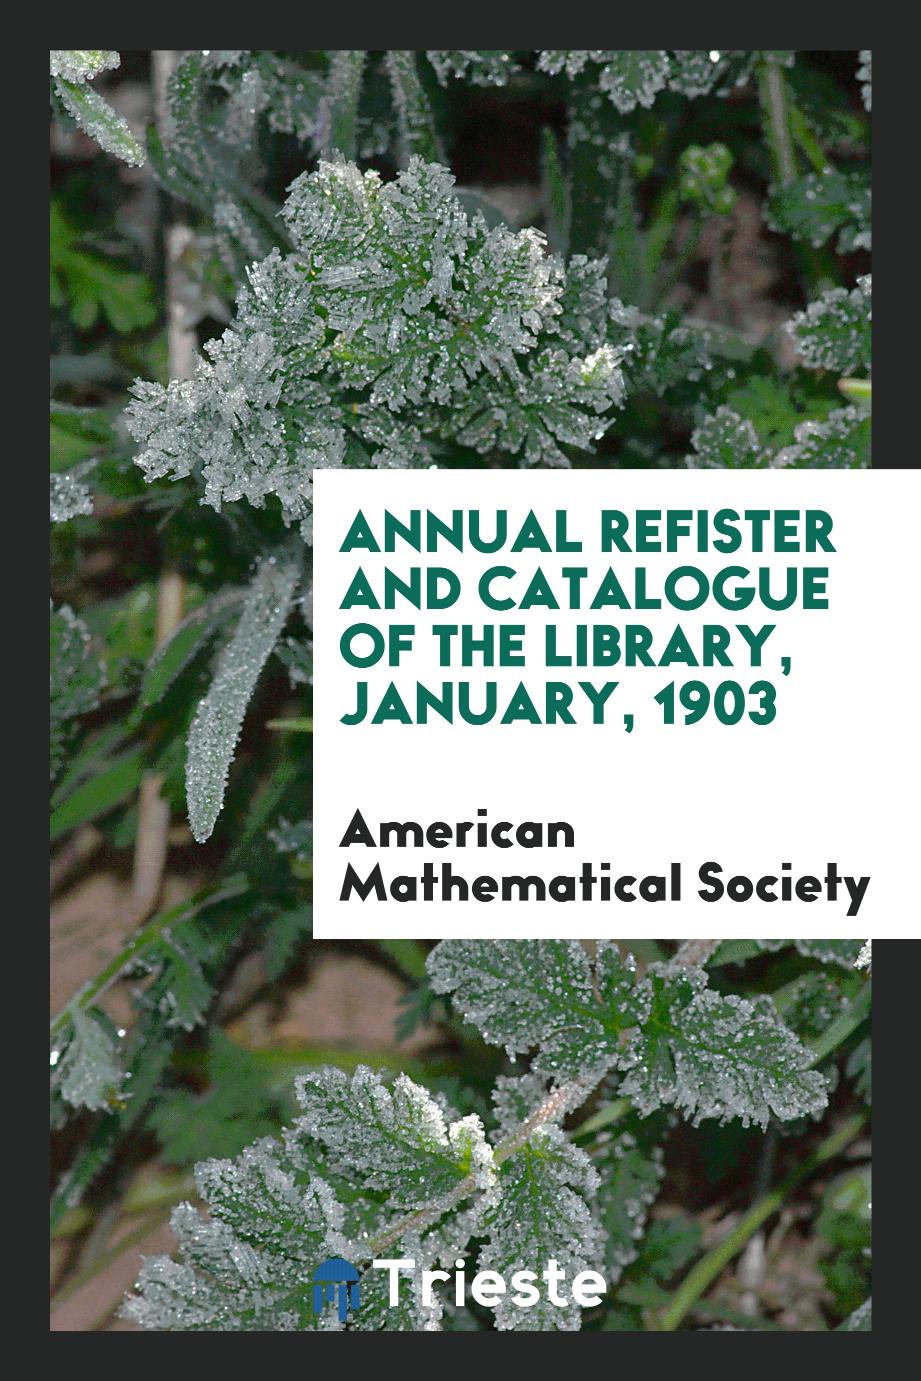 Annual refister and catalogue of the library, january, 1903